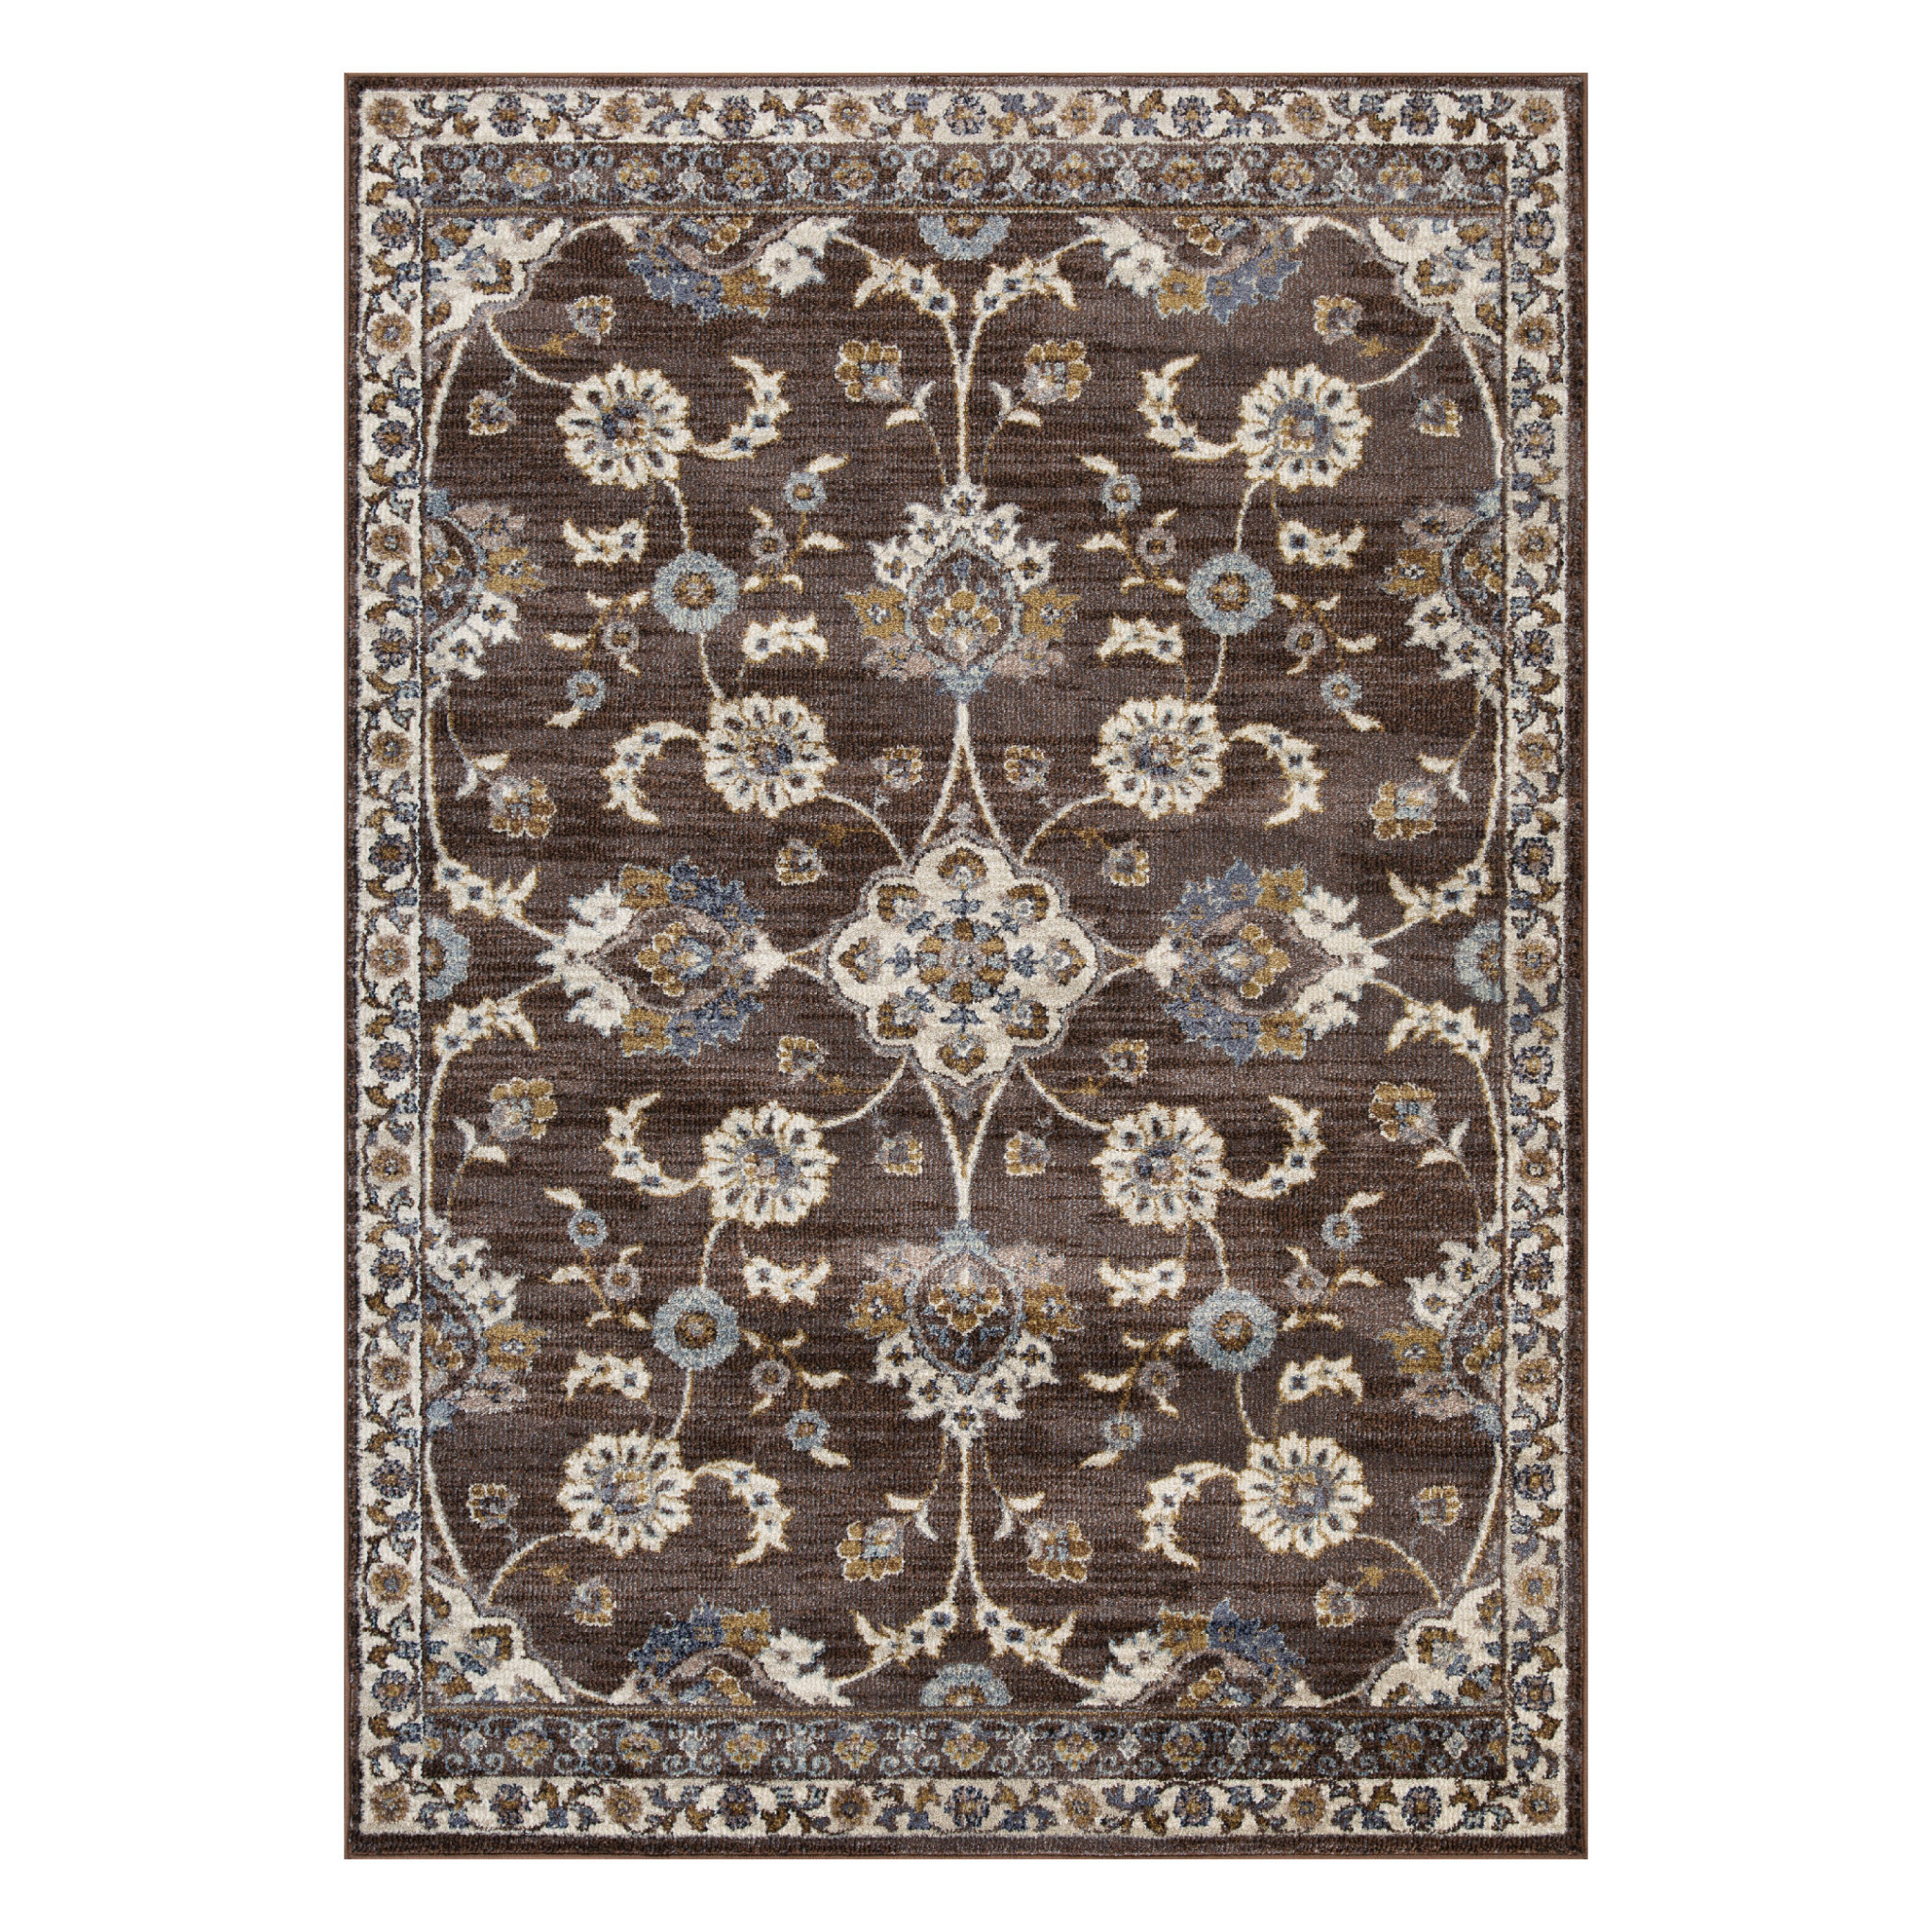 6' x 9' Brown Floral Power Loom Area Rug With Fringe-532150-1